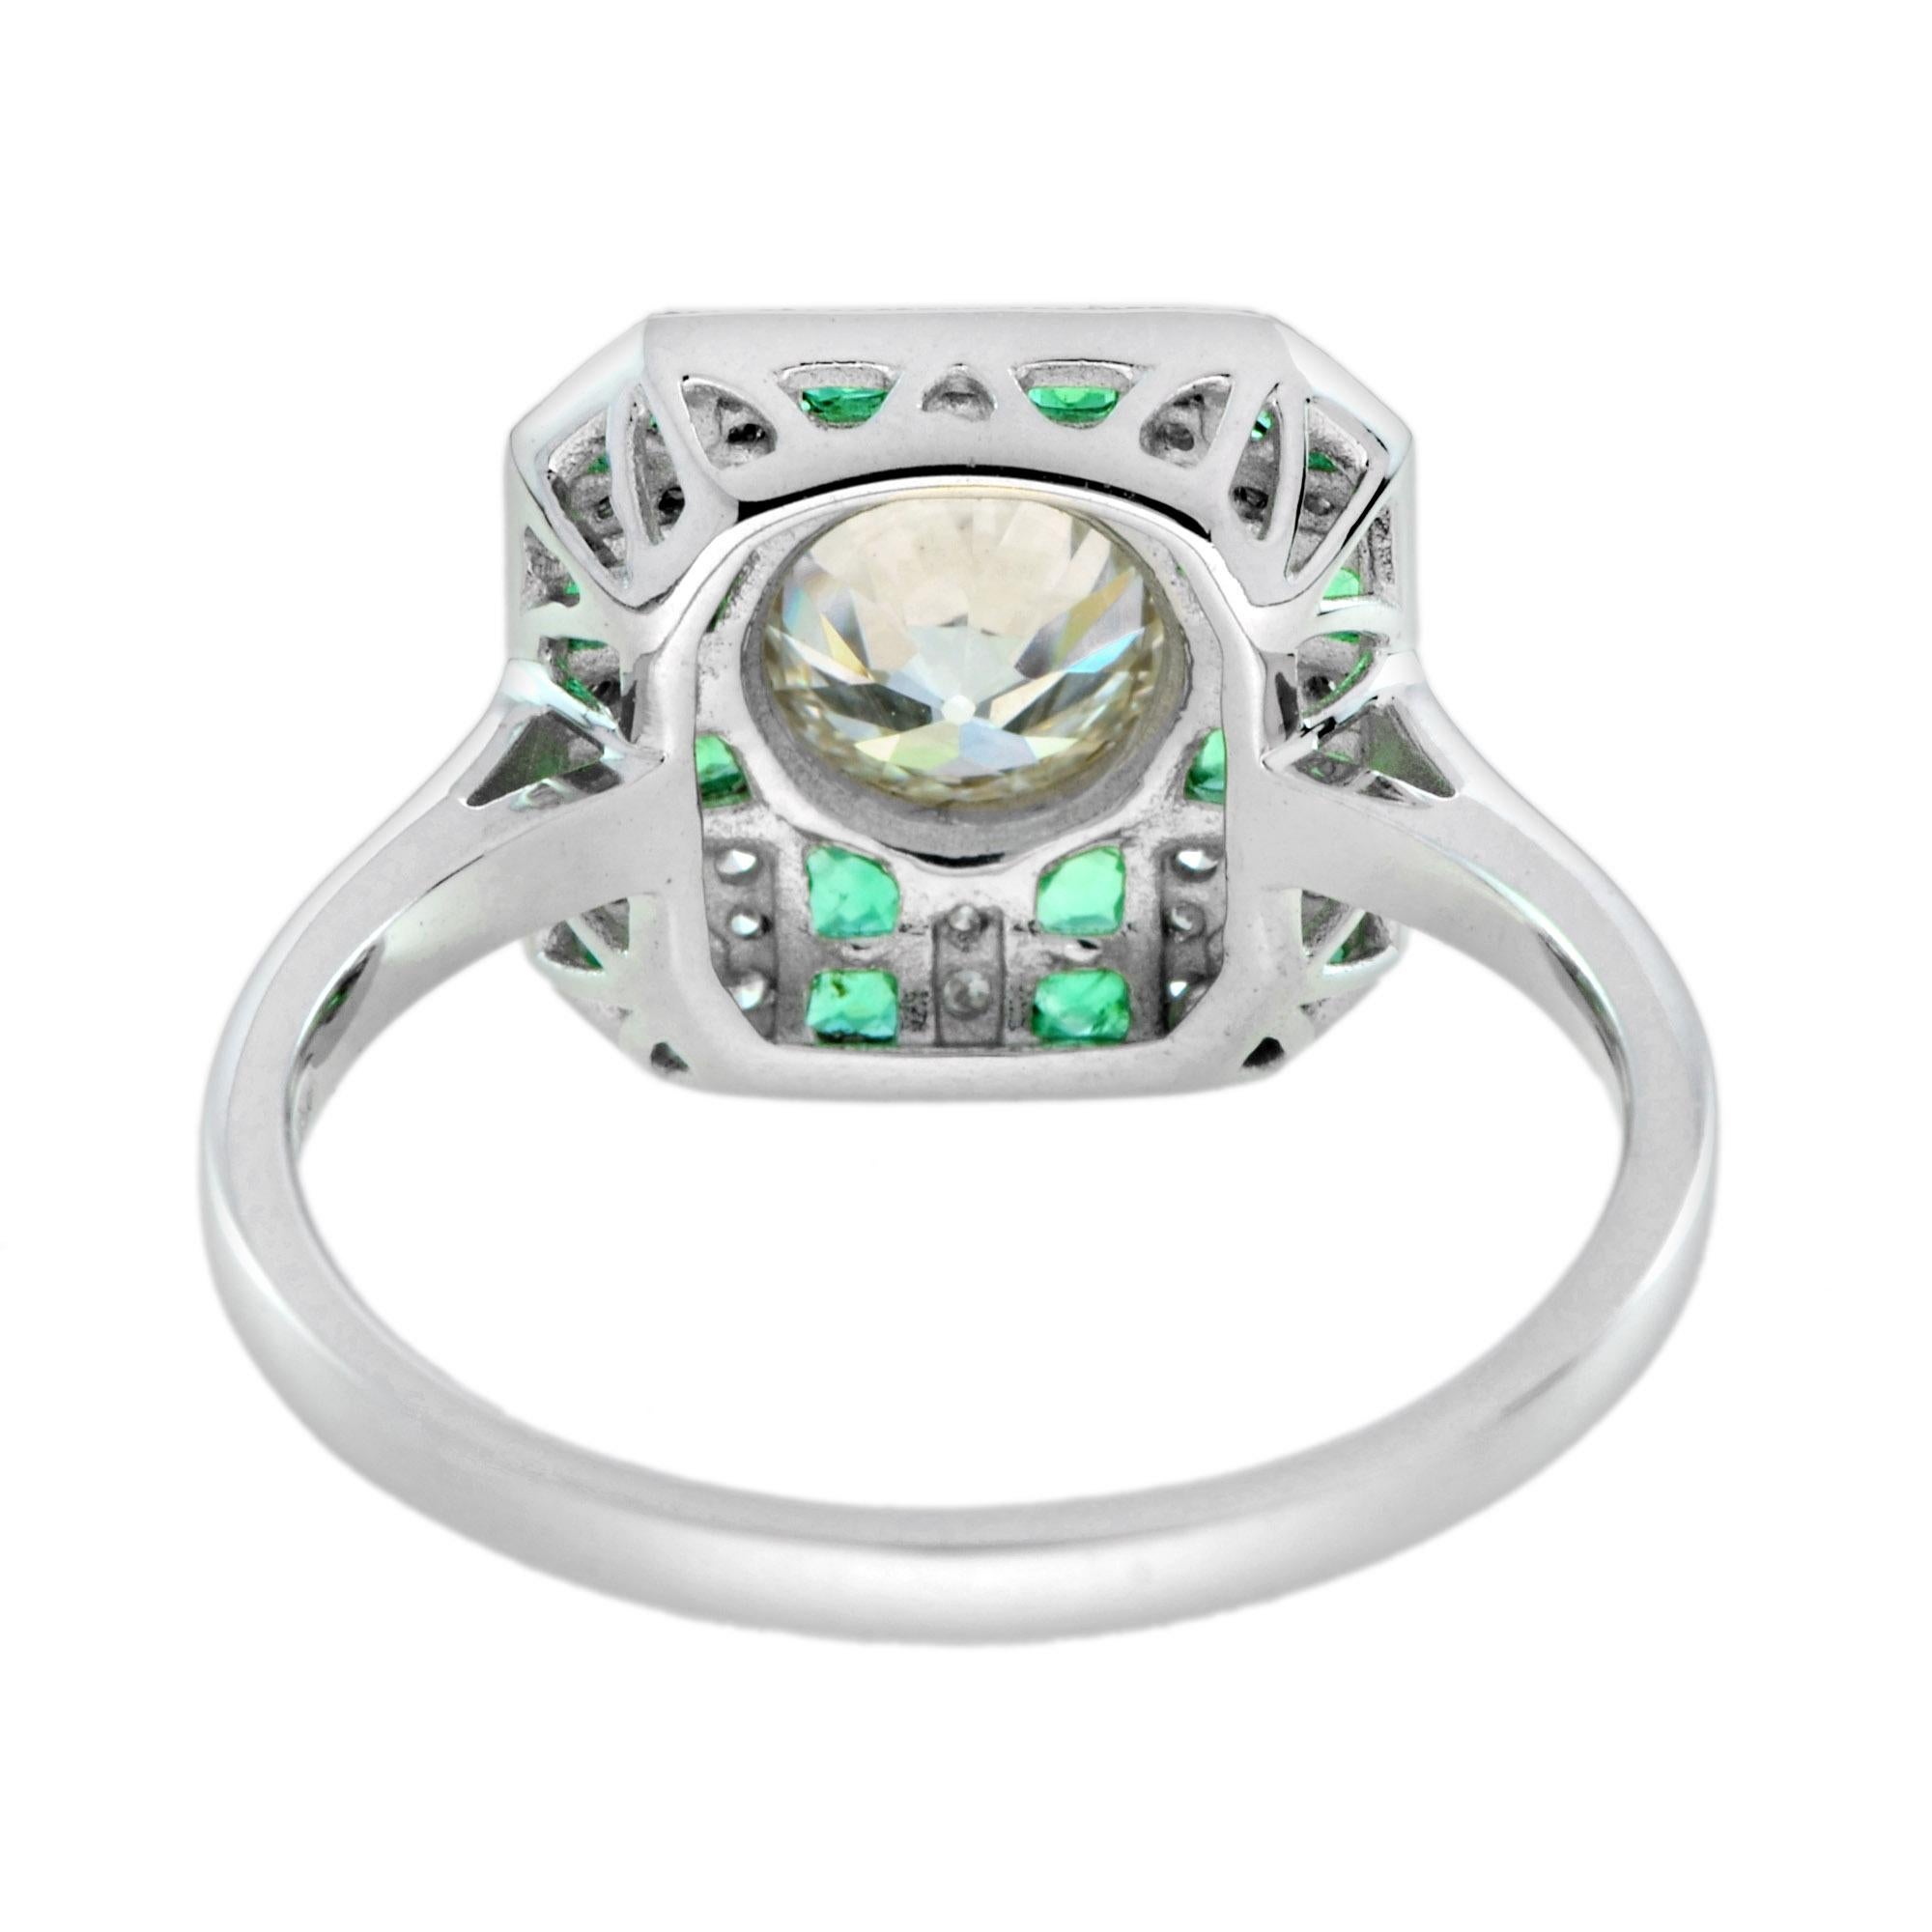 GIA Diamond with Emerald Art Deco Style Engagement Ring in 18k White Gold For Sale 2